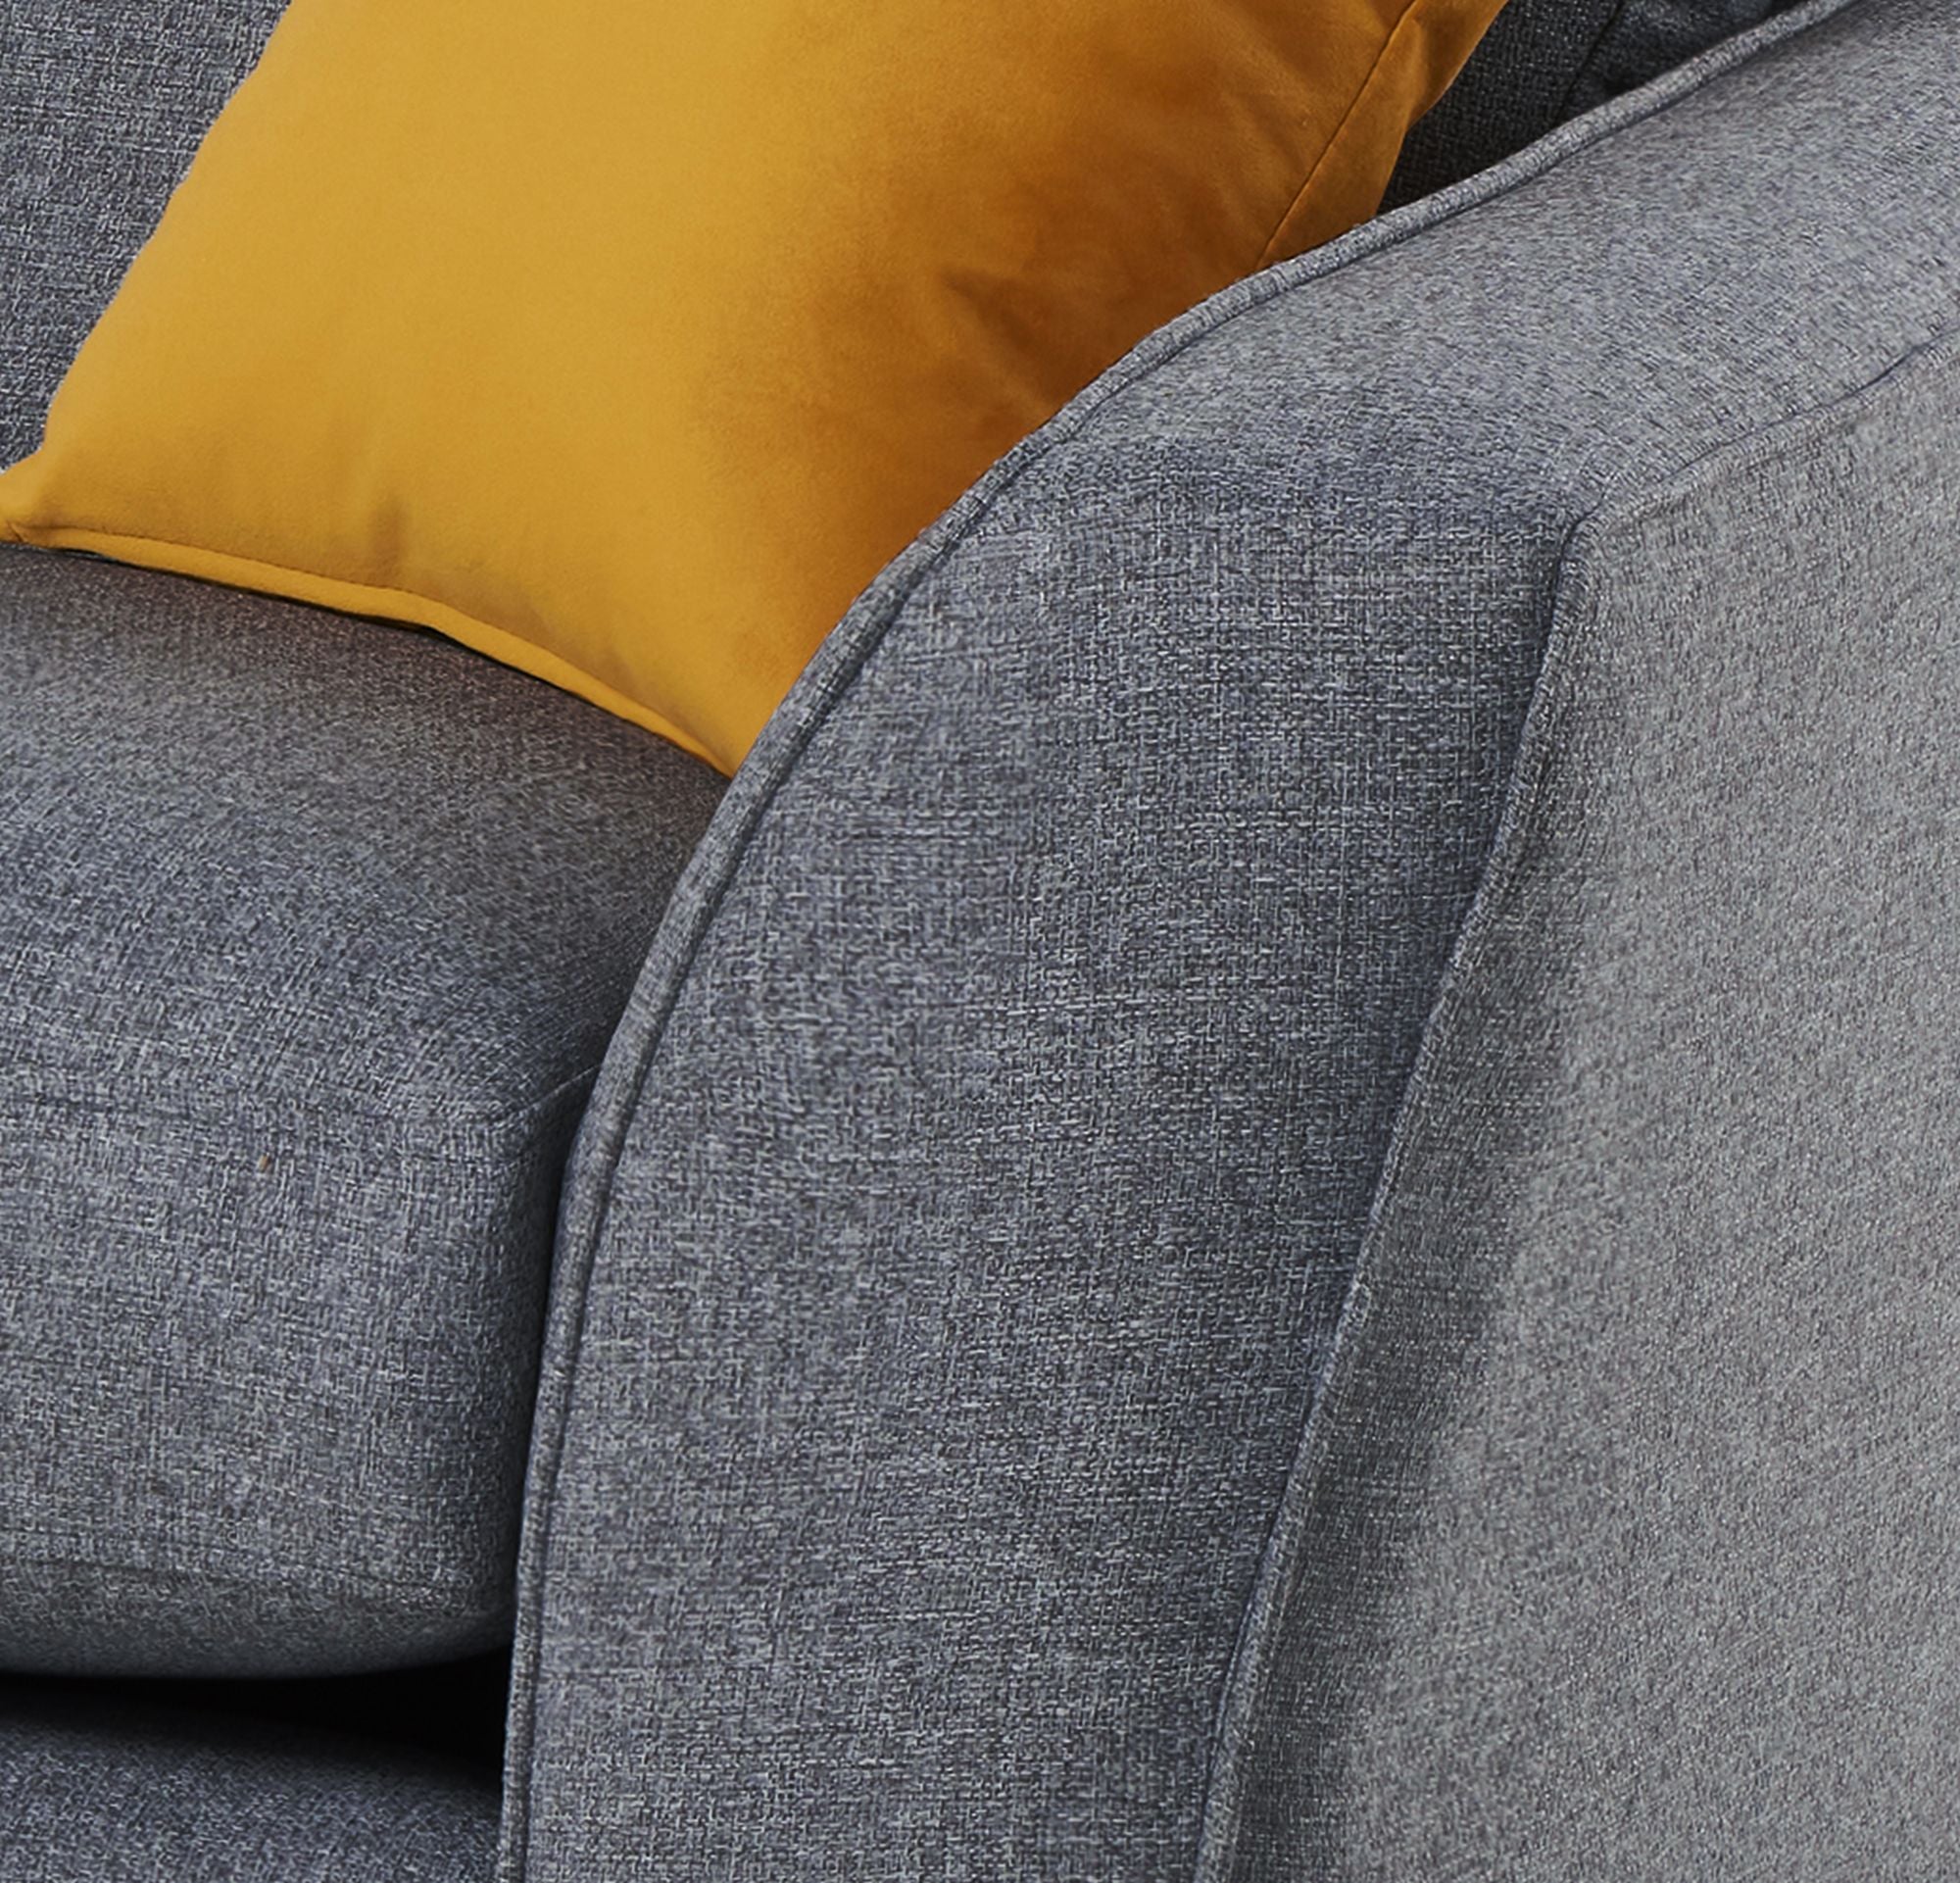 Libby arm sofa arm end in denim showing dual piping detail